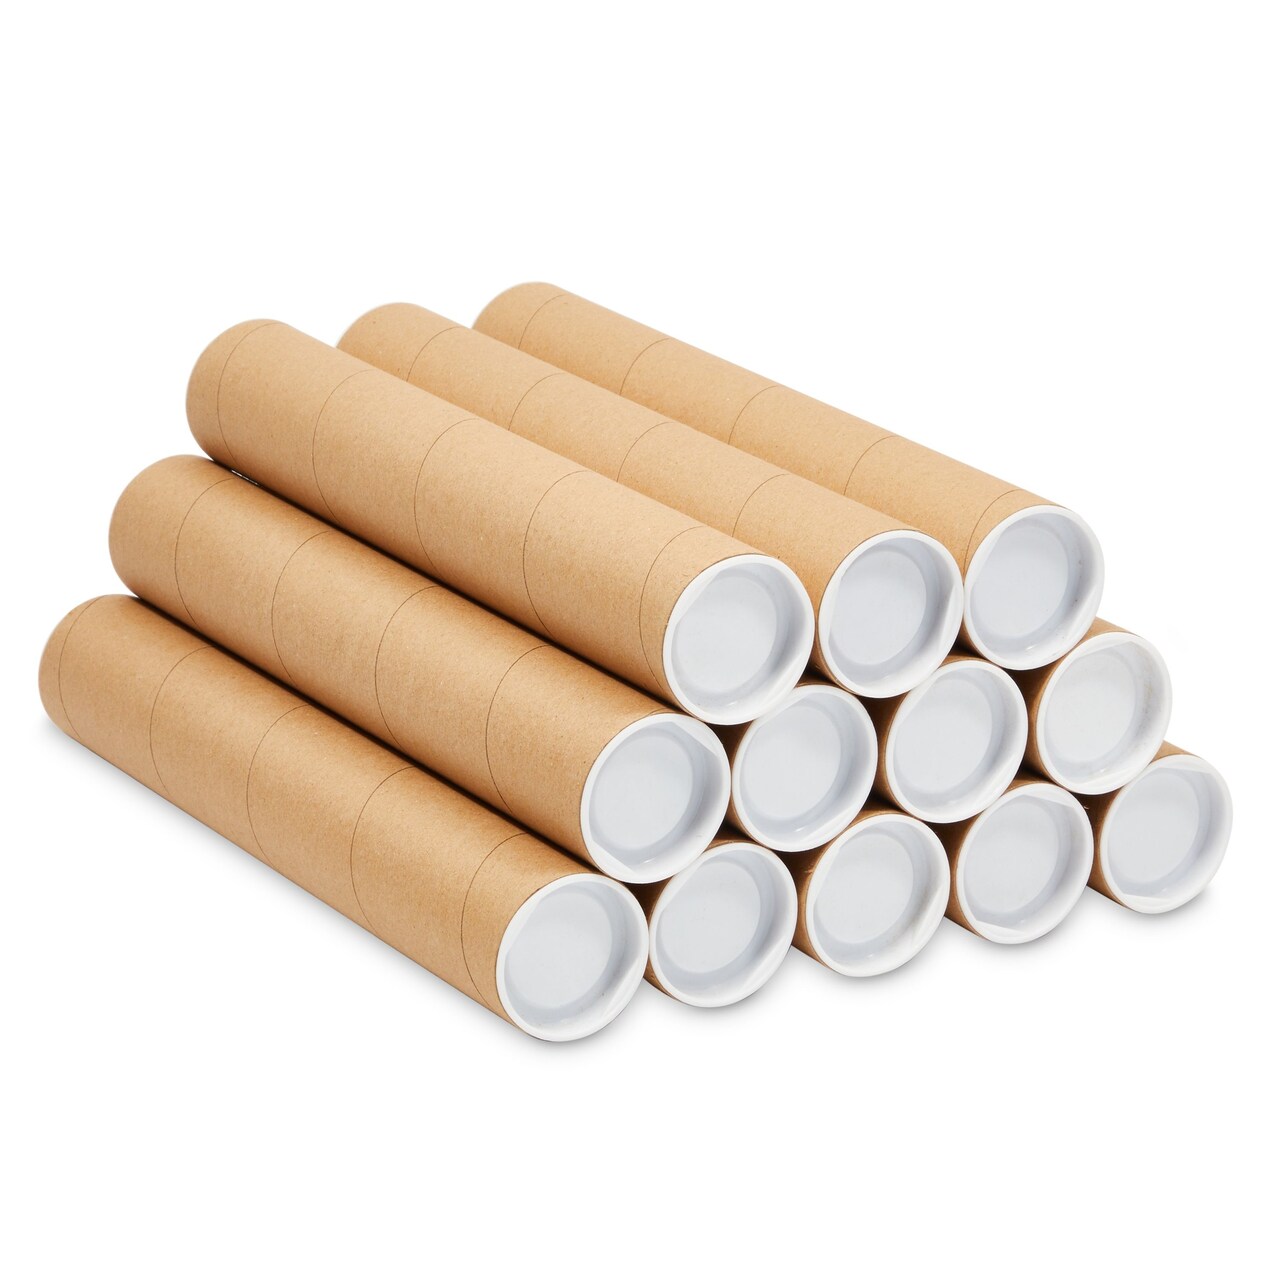 12-Pack Mailing Tubes with Caps, 2x12-Inch Kraft Paper Poster Tube for  Shipping, Packing, Bulk Round Packaging, Cardboard Mailers, Art Prints,  Maps